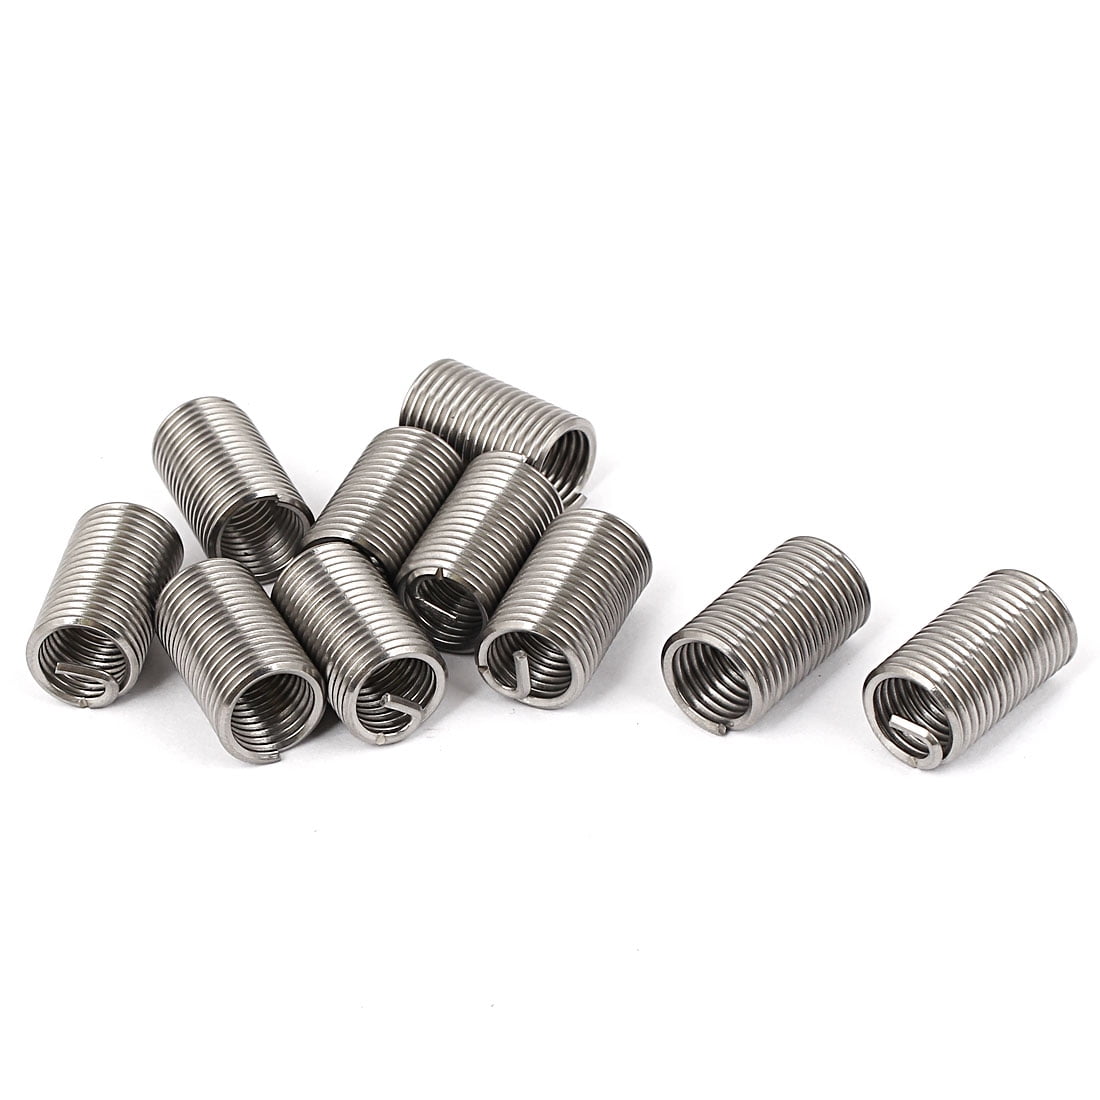 EZLOK UNC 303 STAINLESS STEEL THREADED INSERTS SIZES 4-40 to 3/4-10 303 